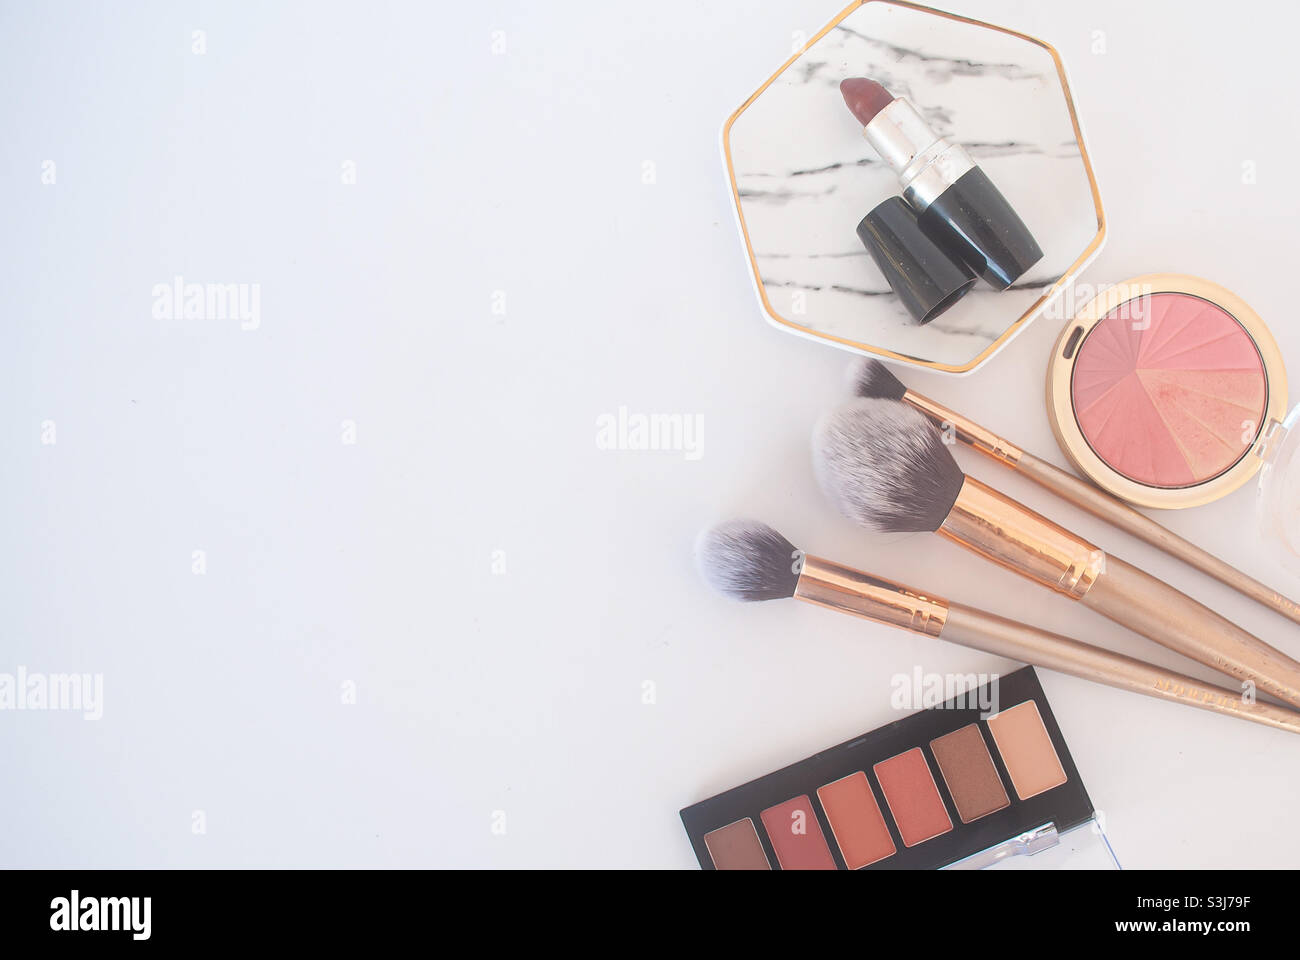 Makeup brushes, lipstick, powder and eye shadows in a white background Stock Photo